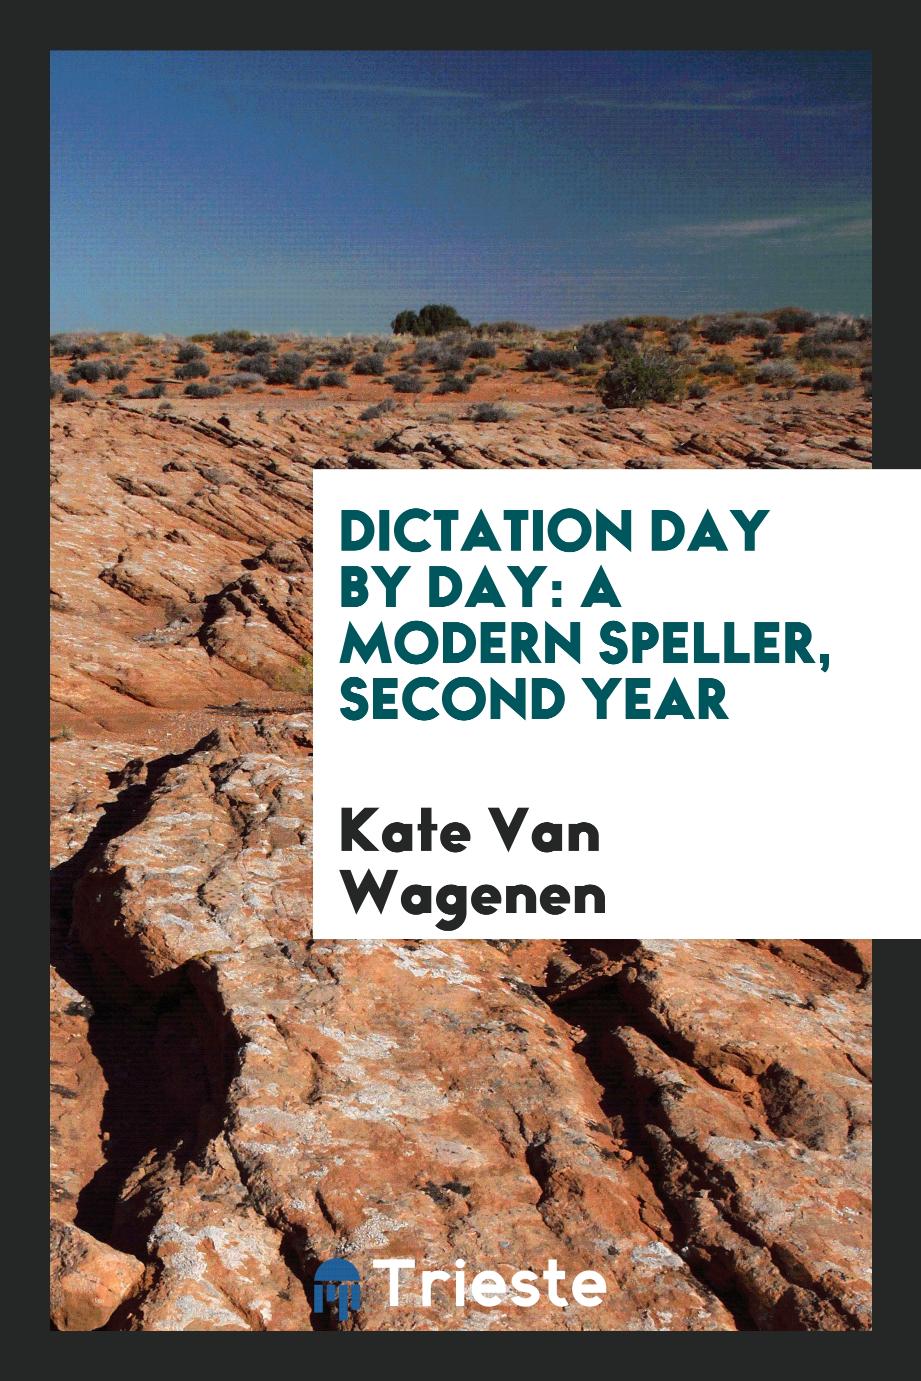 Dictation Day by Day: A Modern Speller, Second Year